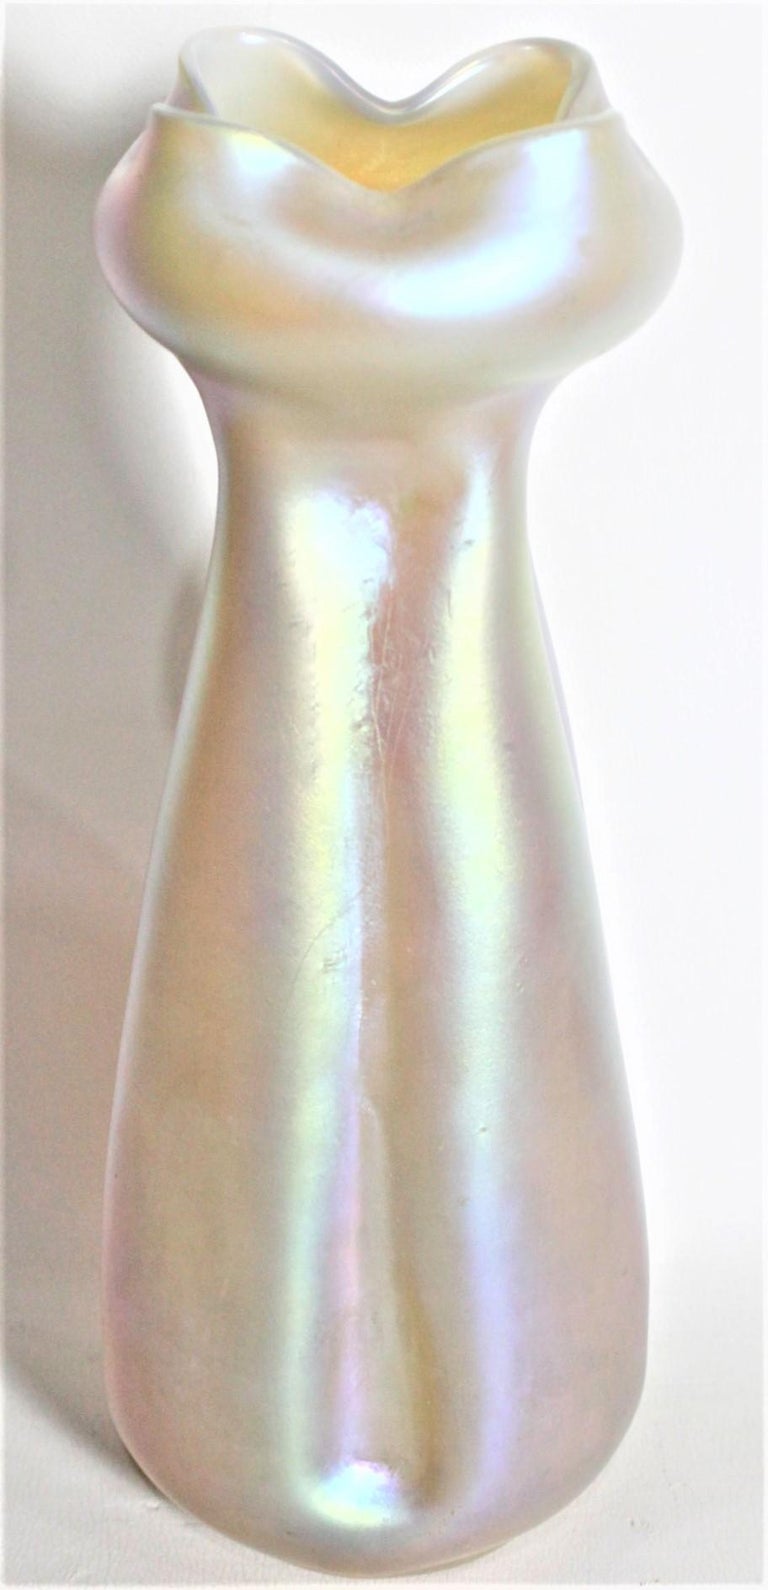 This antique art glass vase is unsigned but was made by Loetz of Austria in circa 1920 in their period Art Deco style. This pale yellow iridescent or 'Candis Silberiris' art glass vase has indented sides and a bulbous crimped top. This vase stand